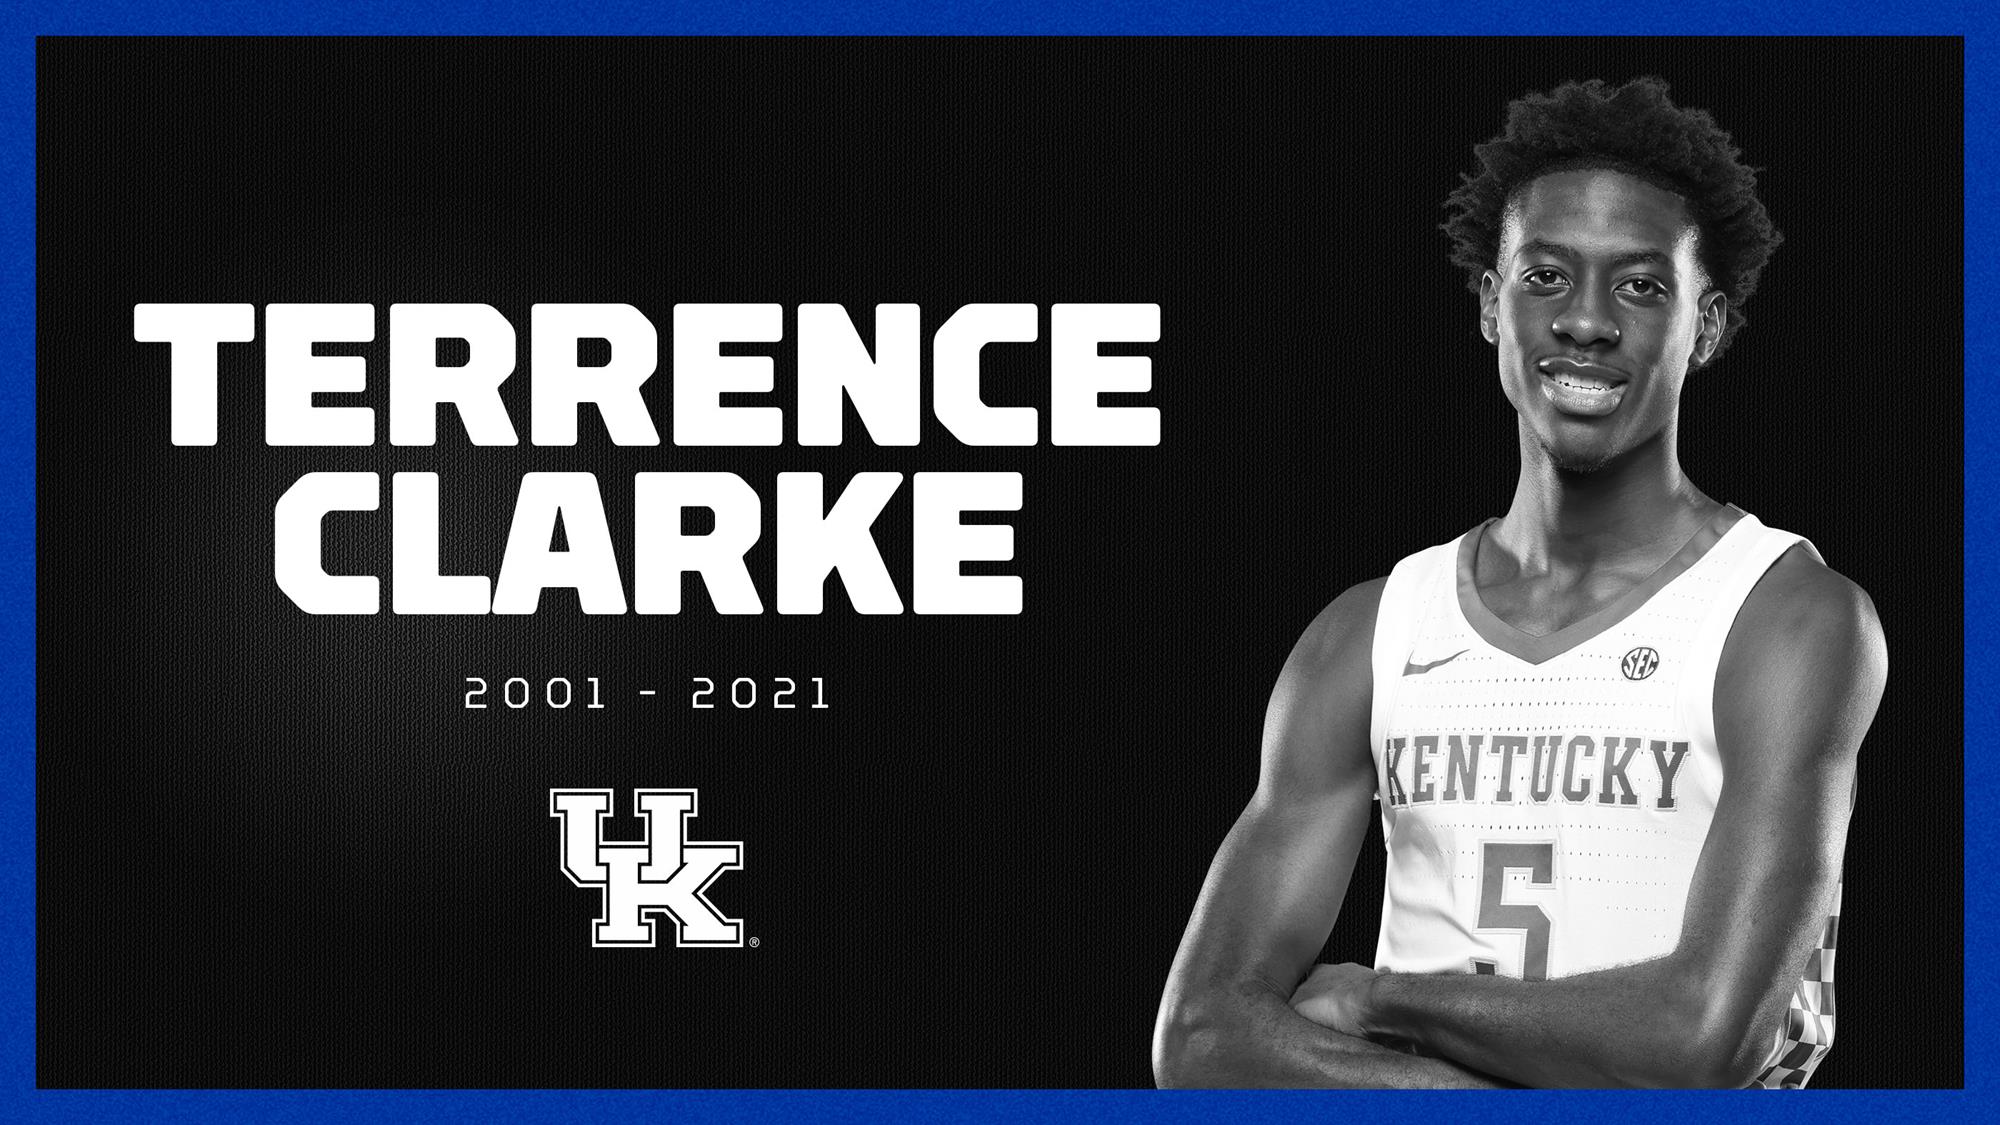 Terrence Clarke Died in a Car Crash at age 19